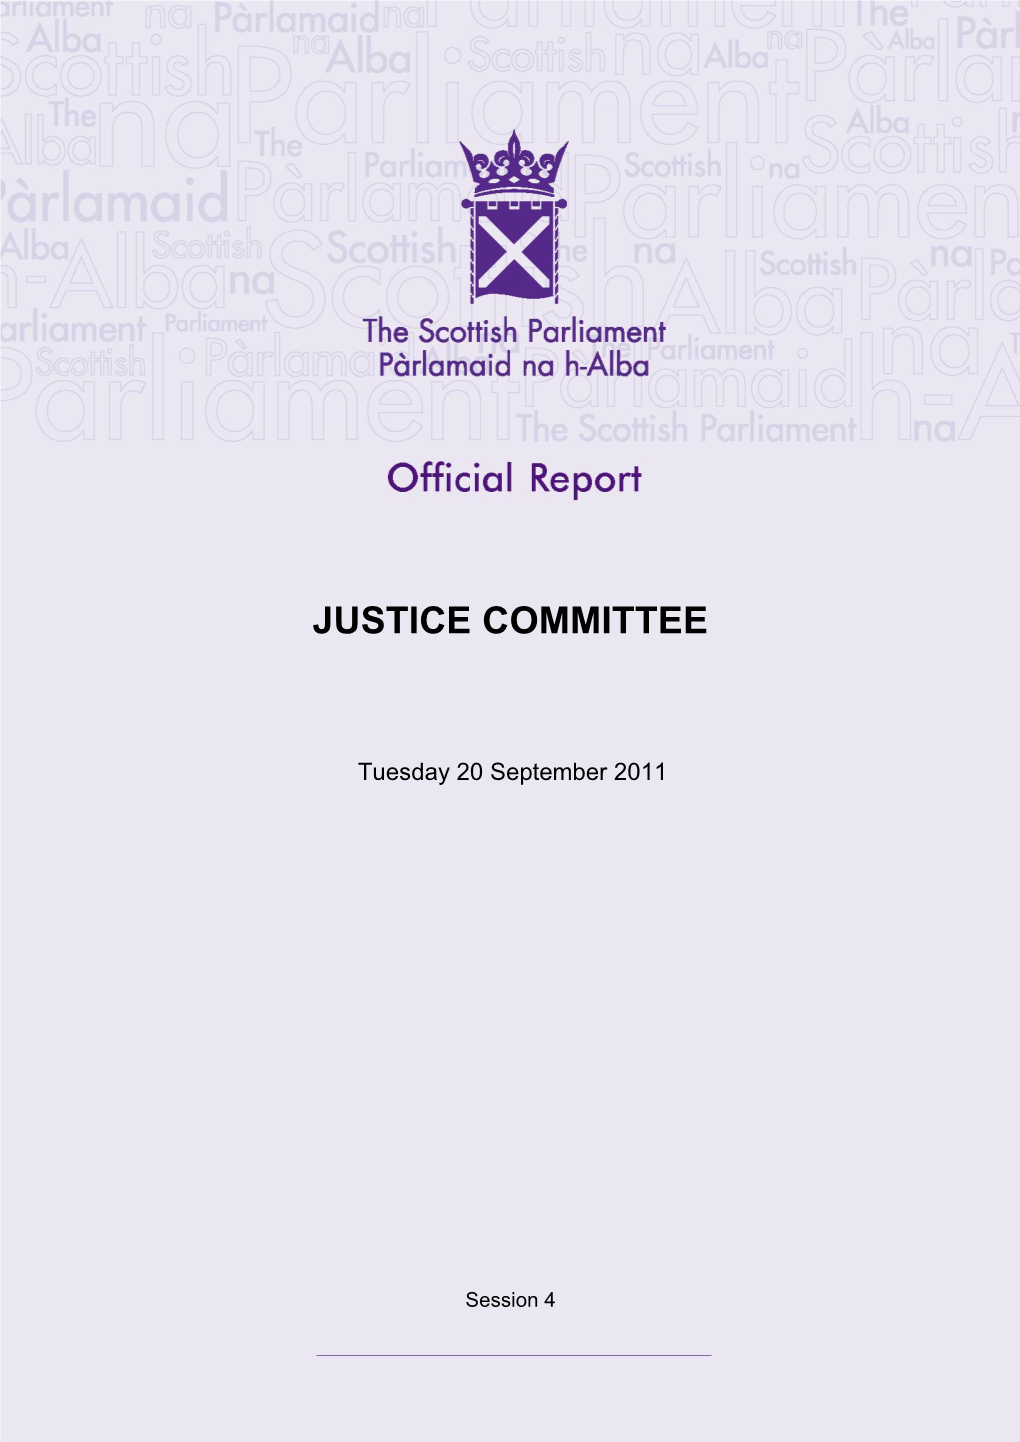 Justice Committee